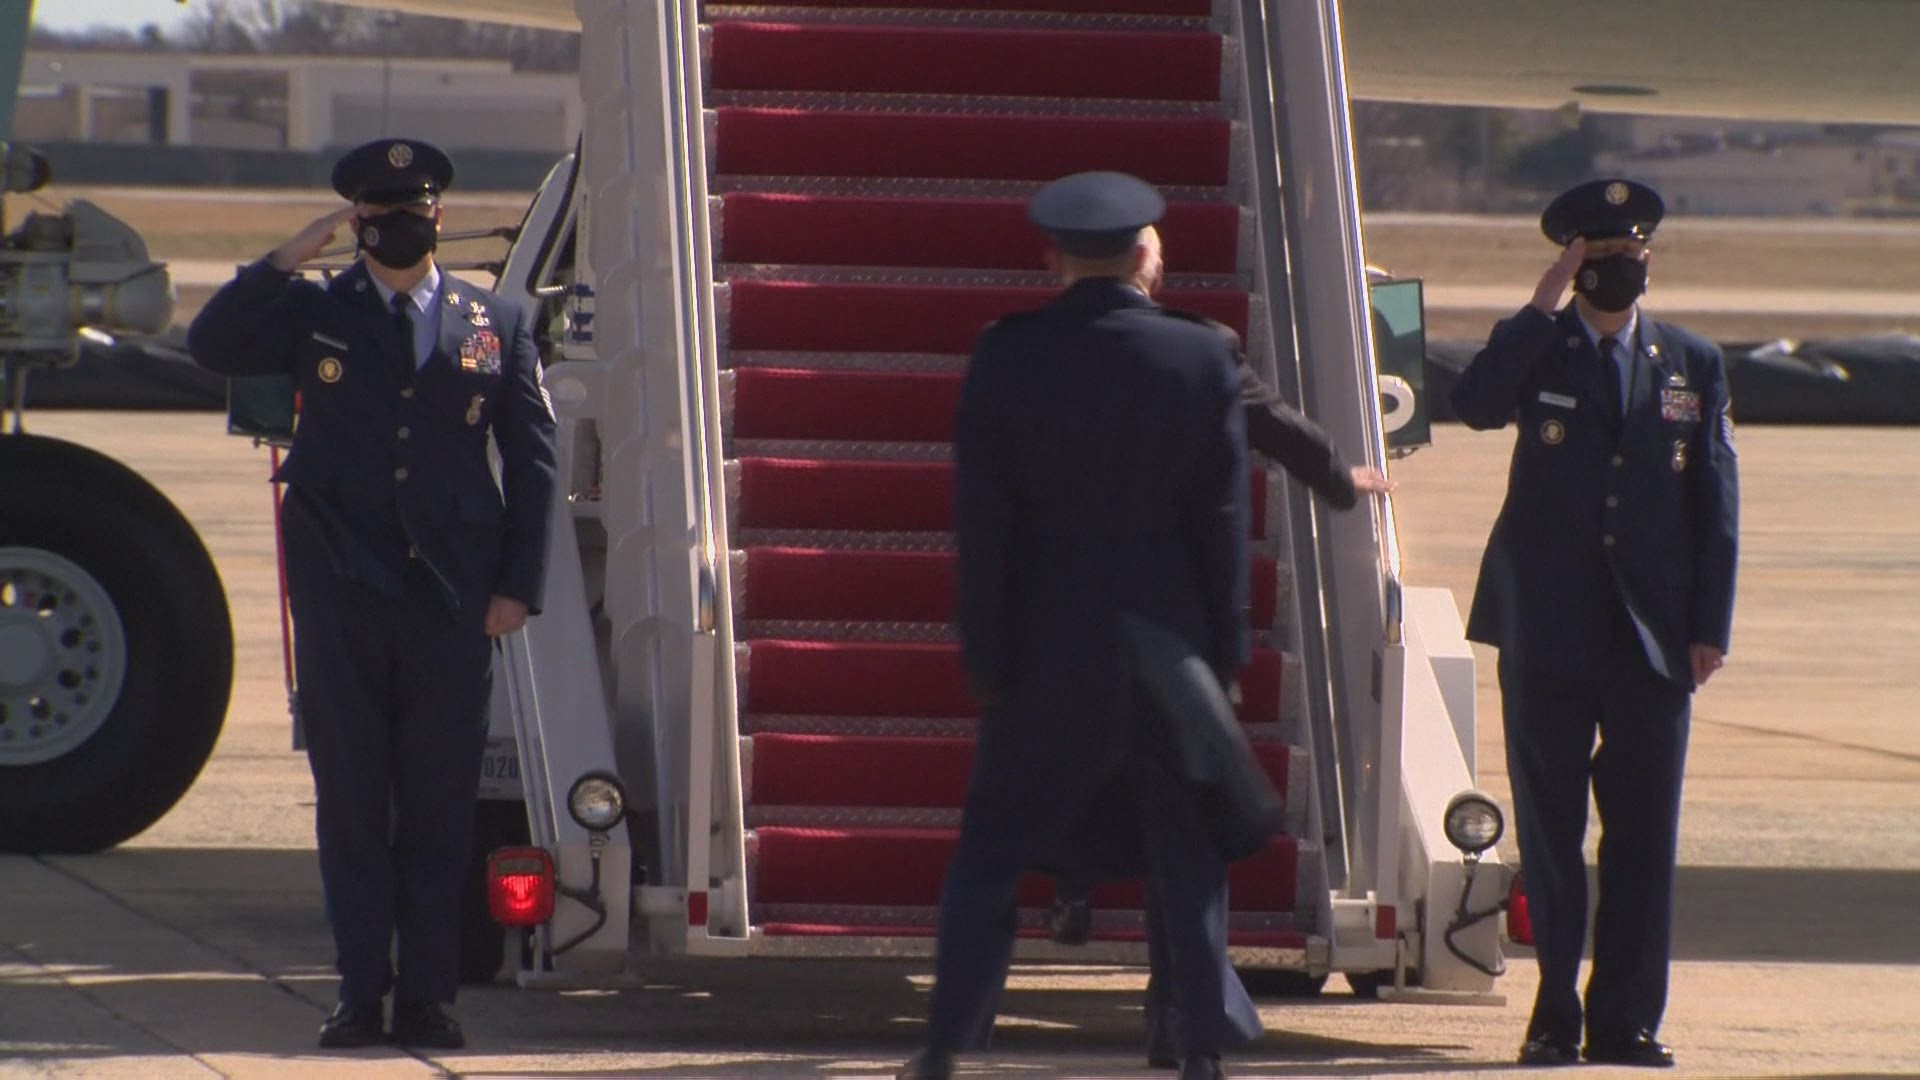 President Joe Biden tripped twice while climbing up the stairs to Air Force One.